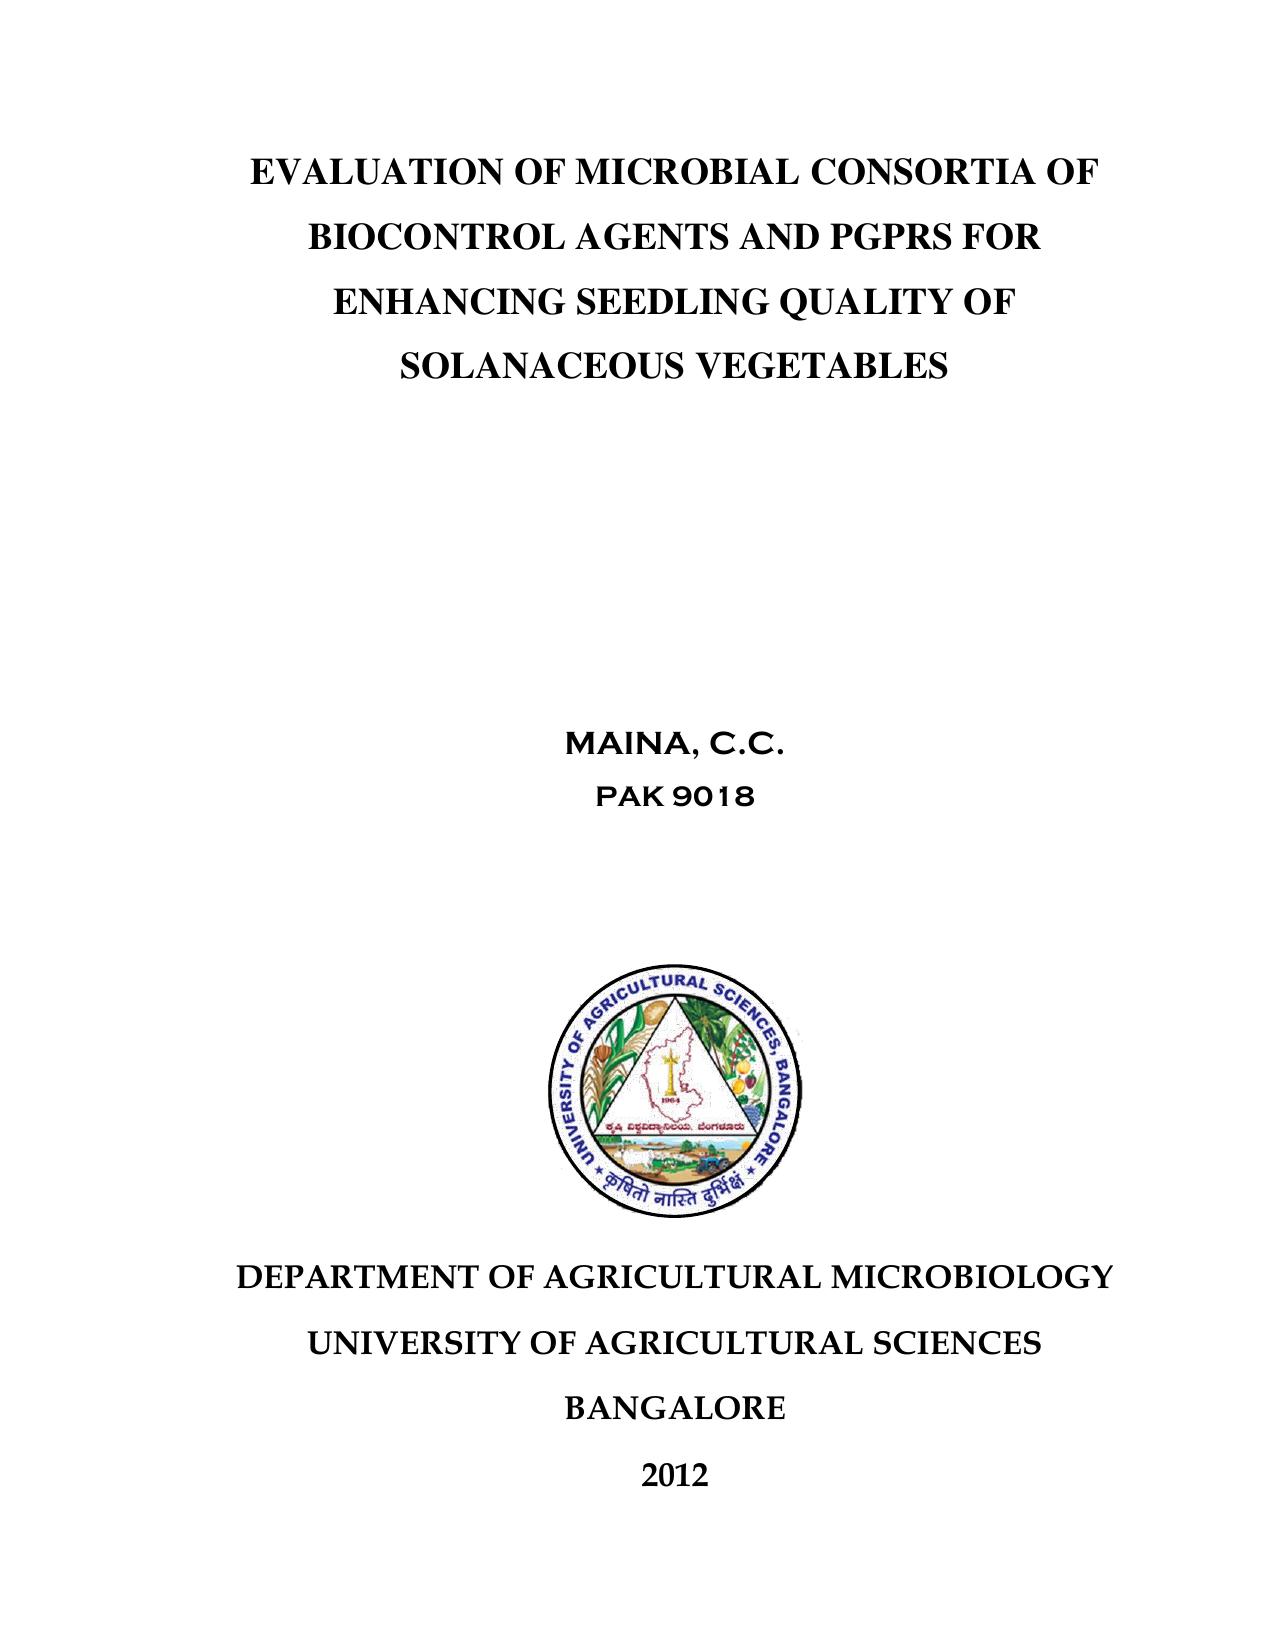 Evaluation of biocontrol agents of soil borne plant pathogens for promoting plant growth in chilli, maize and soybean